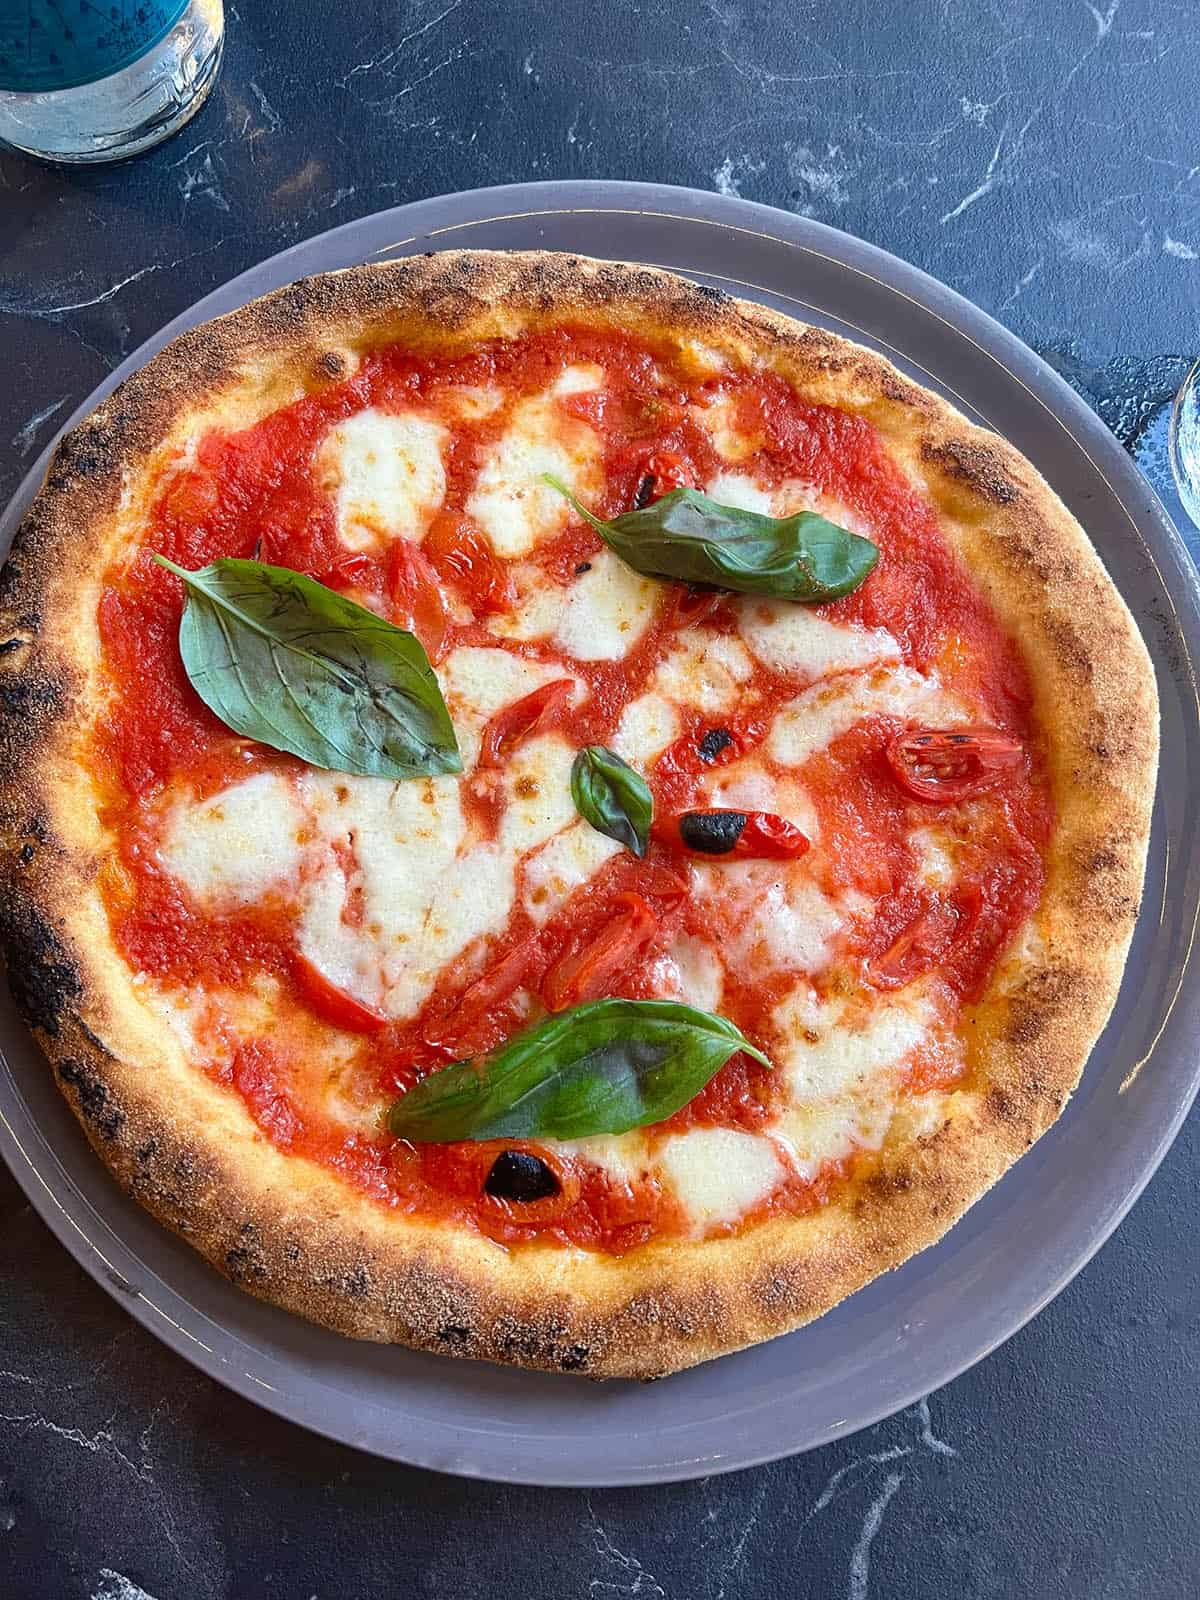 An image of a gluten free margherita pizza at Mastunicola in Palermo, Sicily